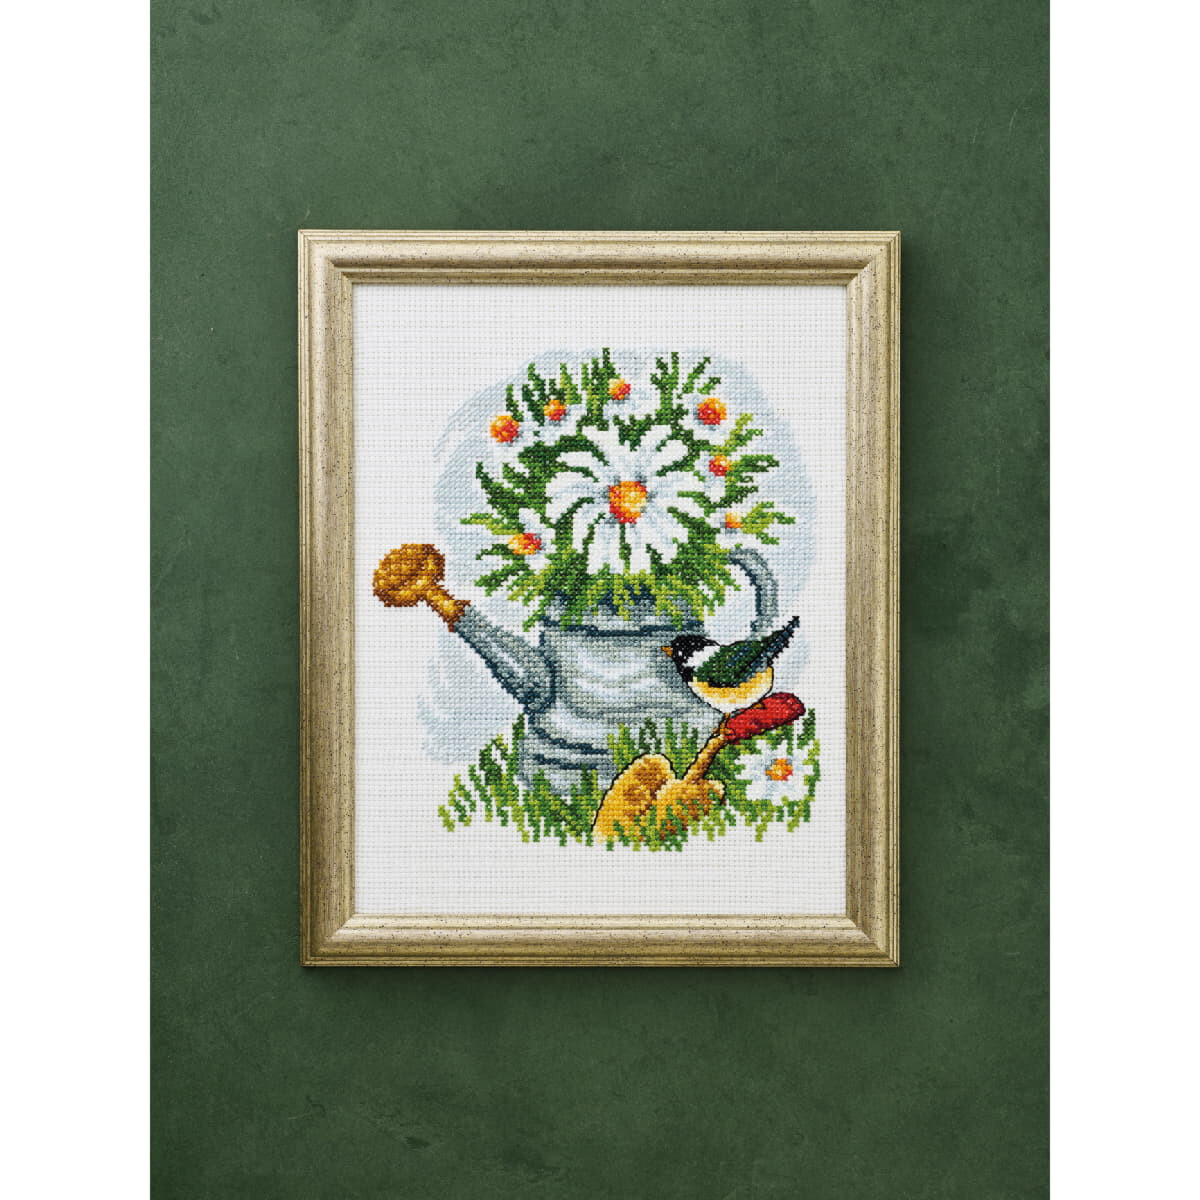 Permin counted cross stitch kit "Mousewhite bird...